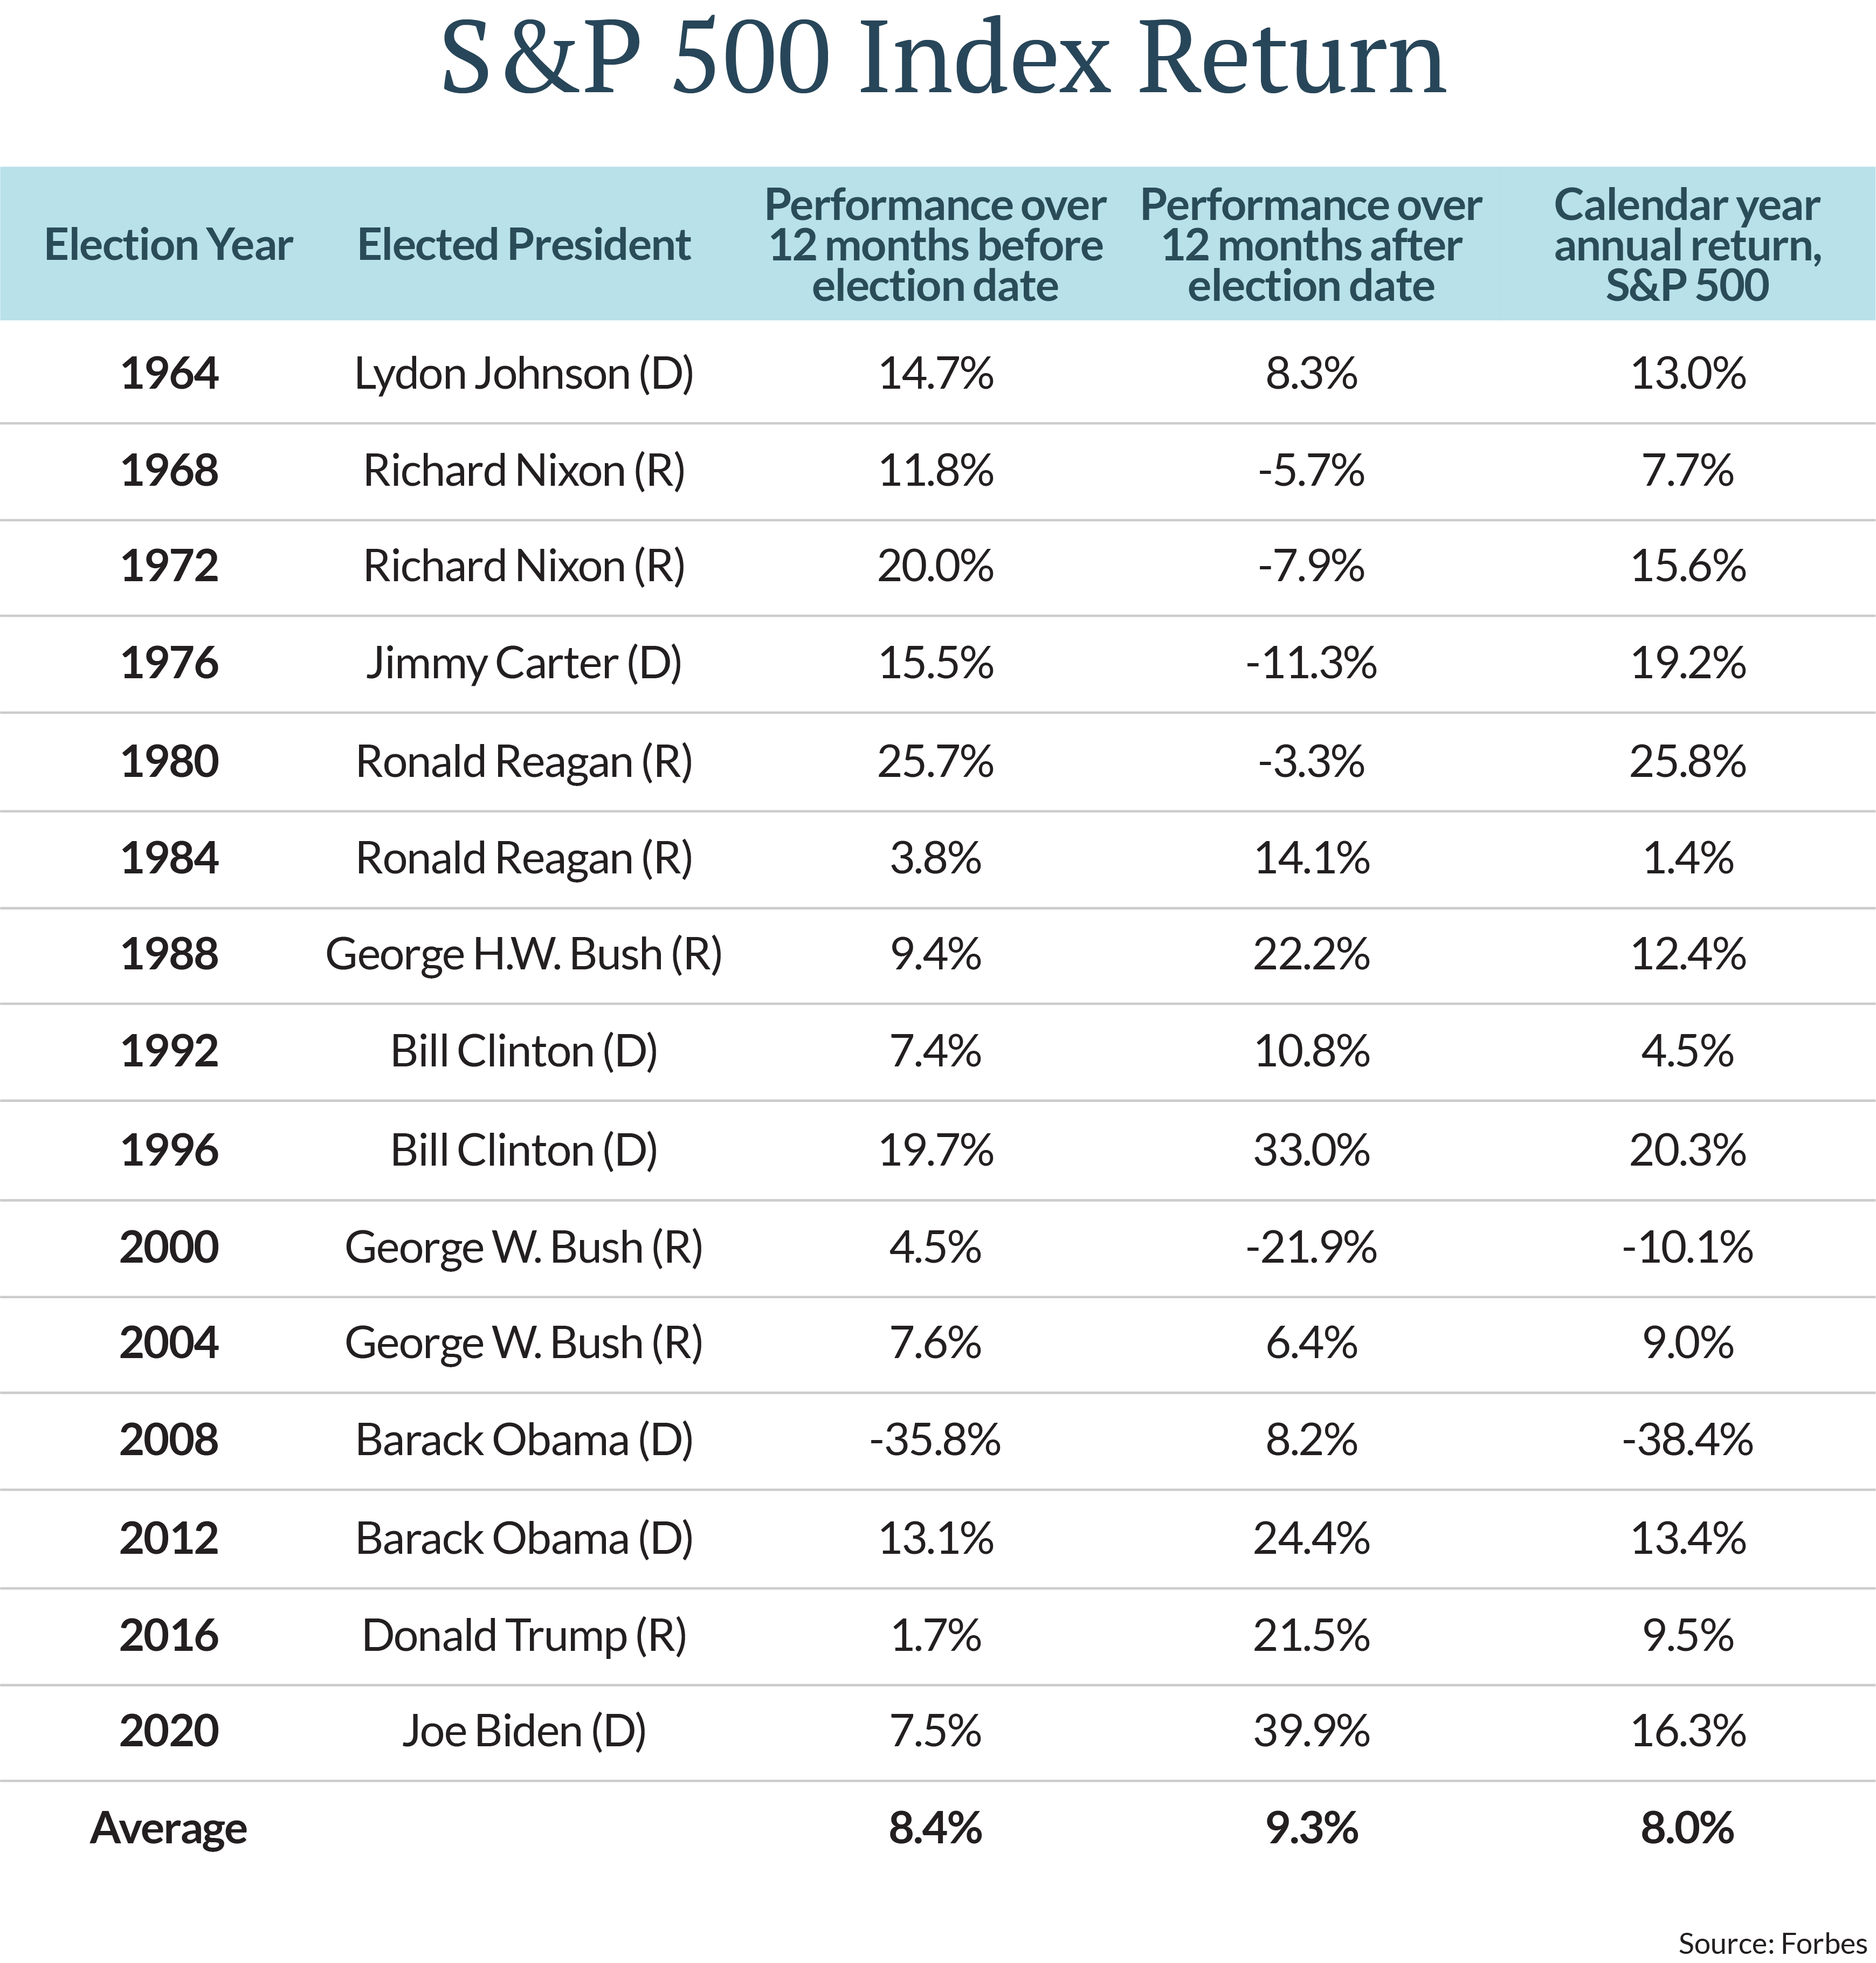 Using the returns from the S&P 500 Index for election periods since 1964, the return for stocks on average was 8.4% before the election and 9.3% the year after.